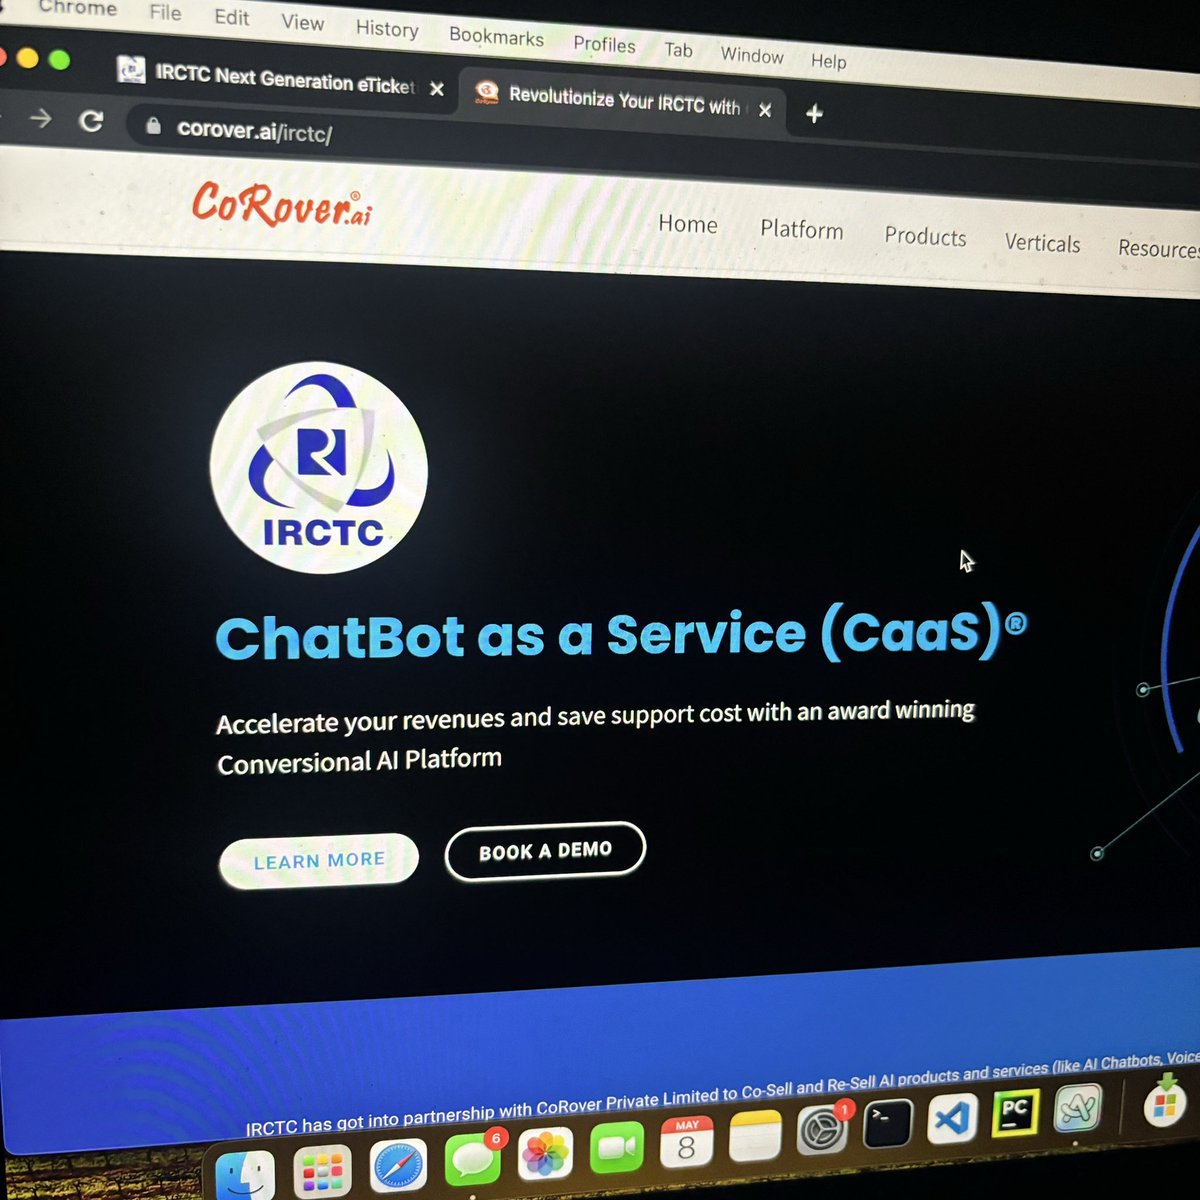 So you’re telling me that @IRCTCofficial has started providing Chatbot as a service? 🤐